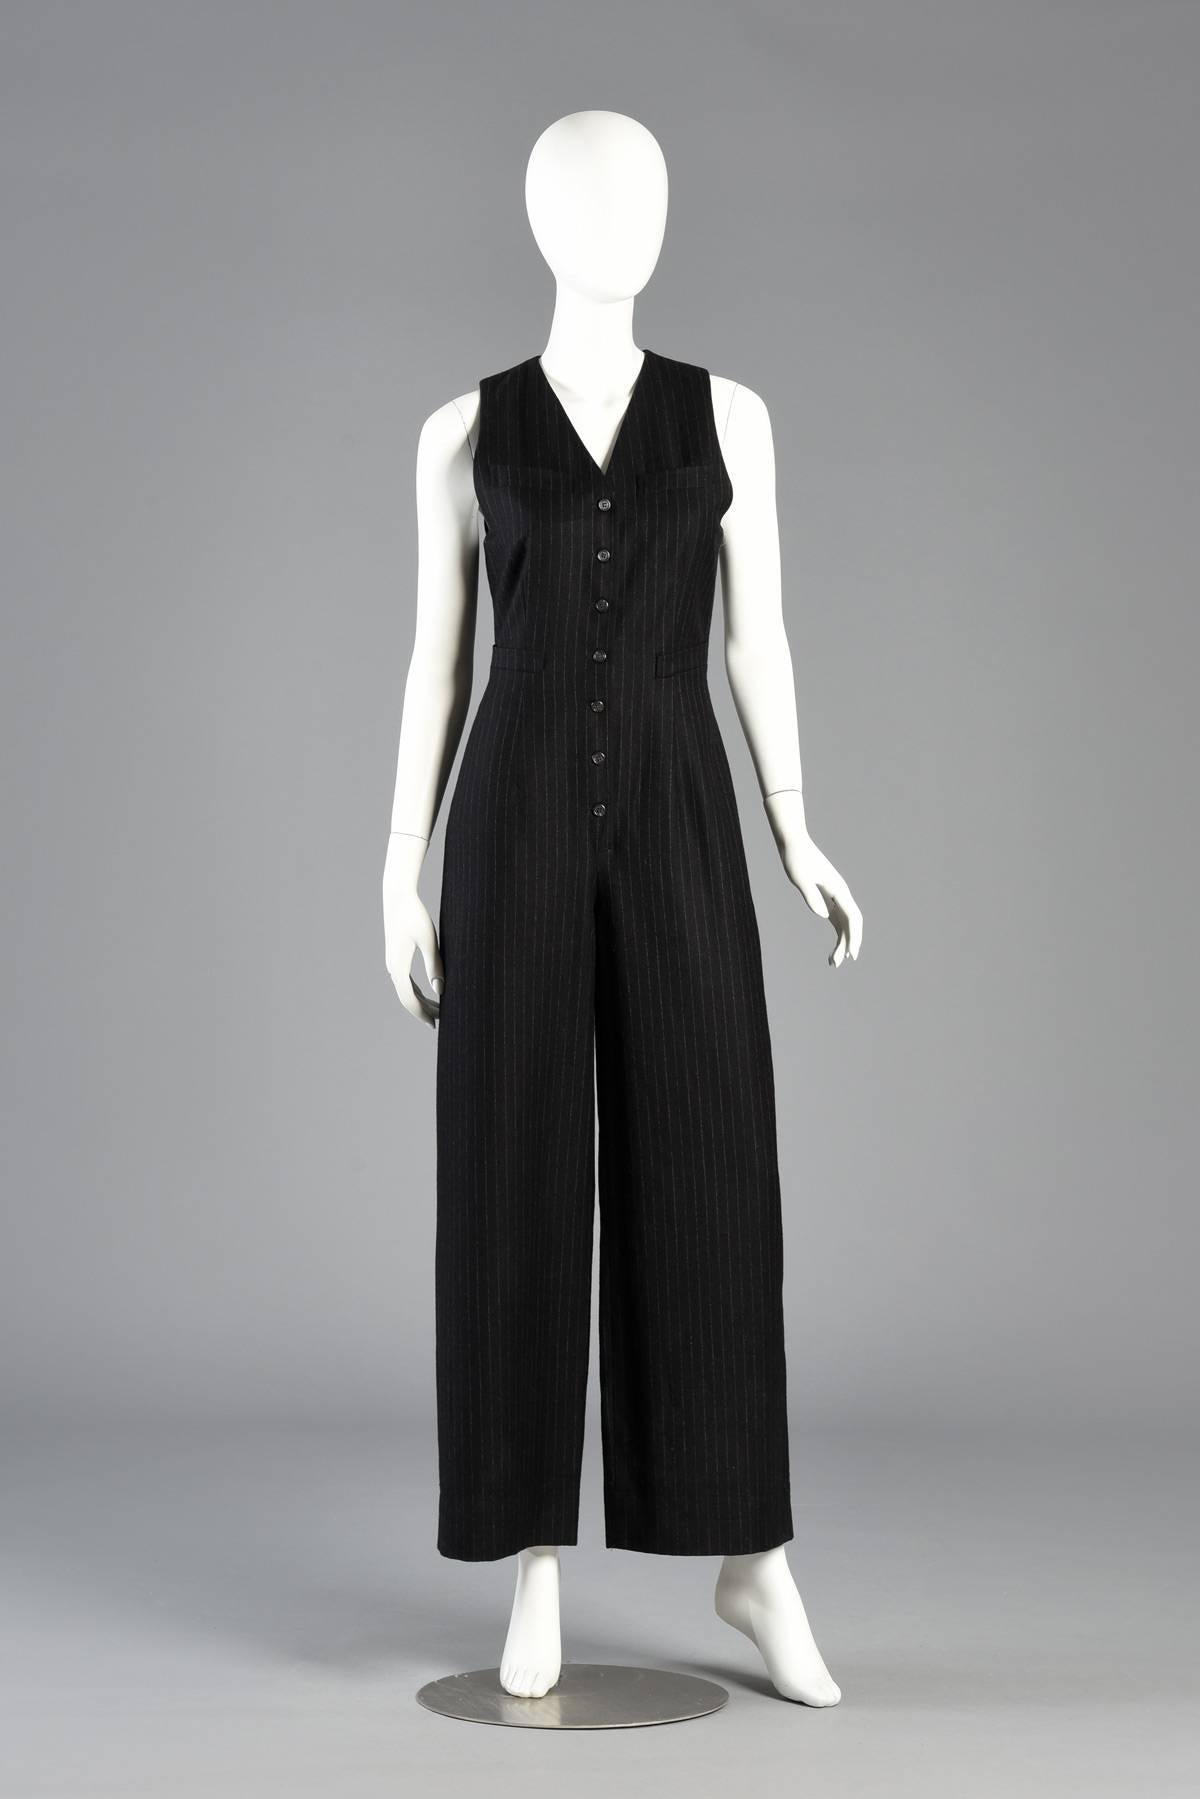 Chic 1990s menswear style at it’s best in this vintage Ralph Lauren pinstripe wool one-piece jumpsuit. Dark black/charcoal wool jumpsuit with lighter gray pinstriping. Menswear suit vest style bodice — even has tiny vest pockets and buckle cinch